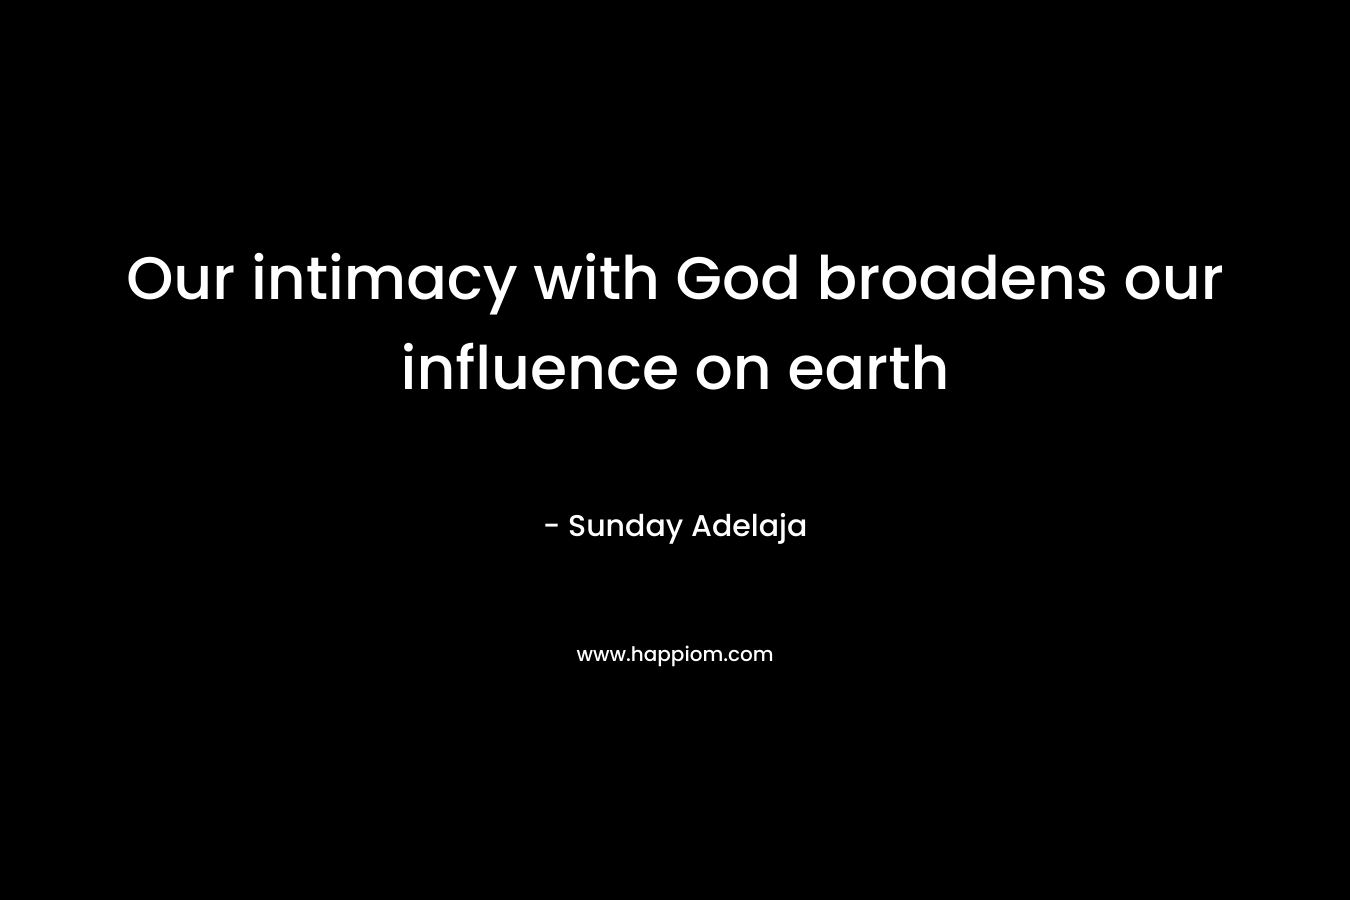 Our intimacy with God broadens our influence on earth